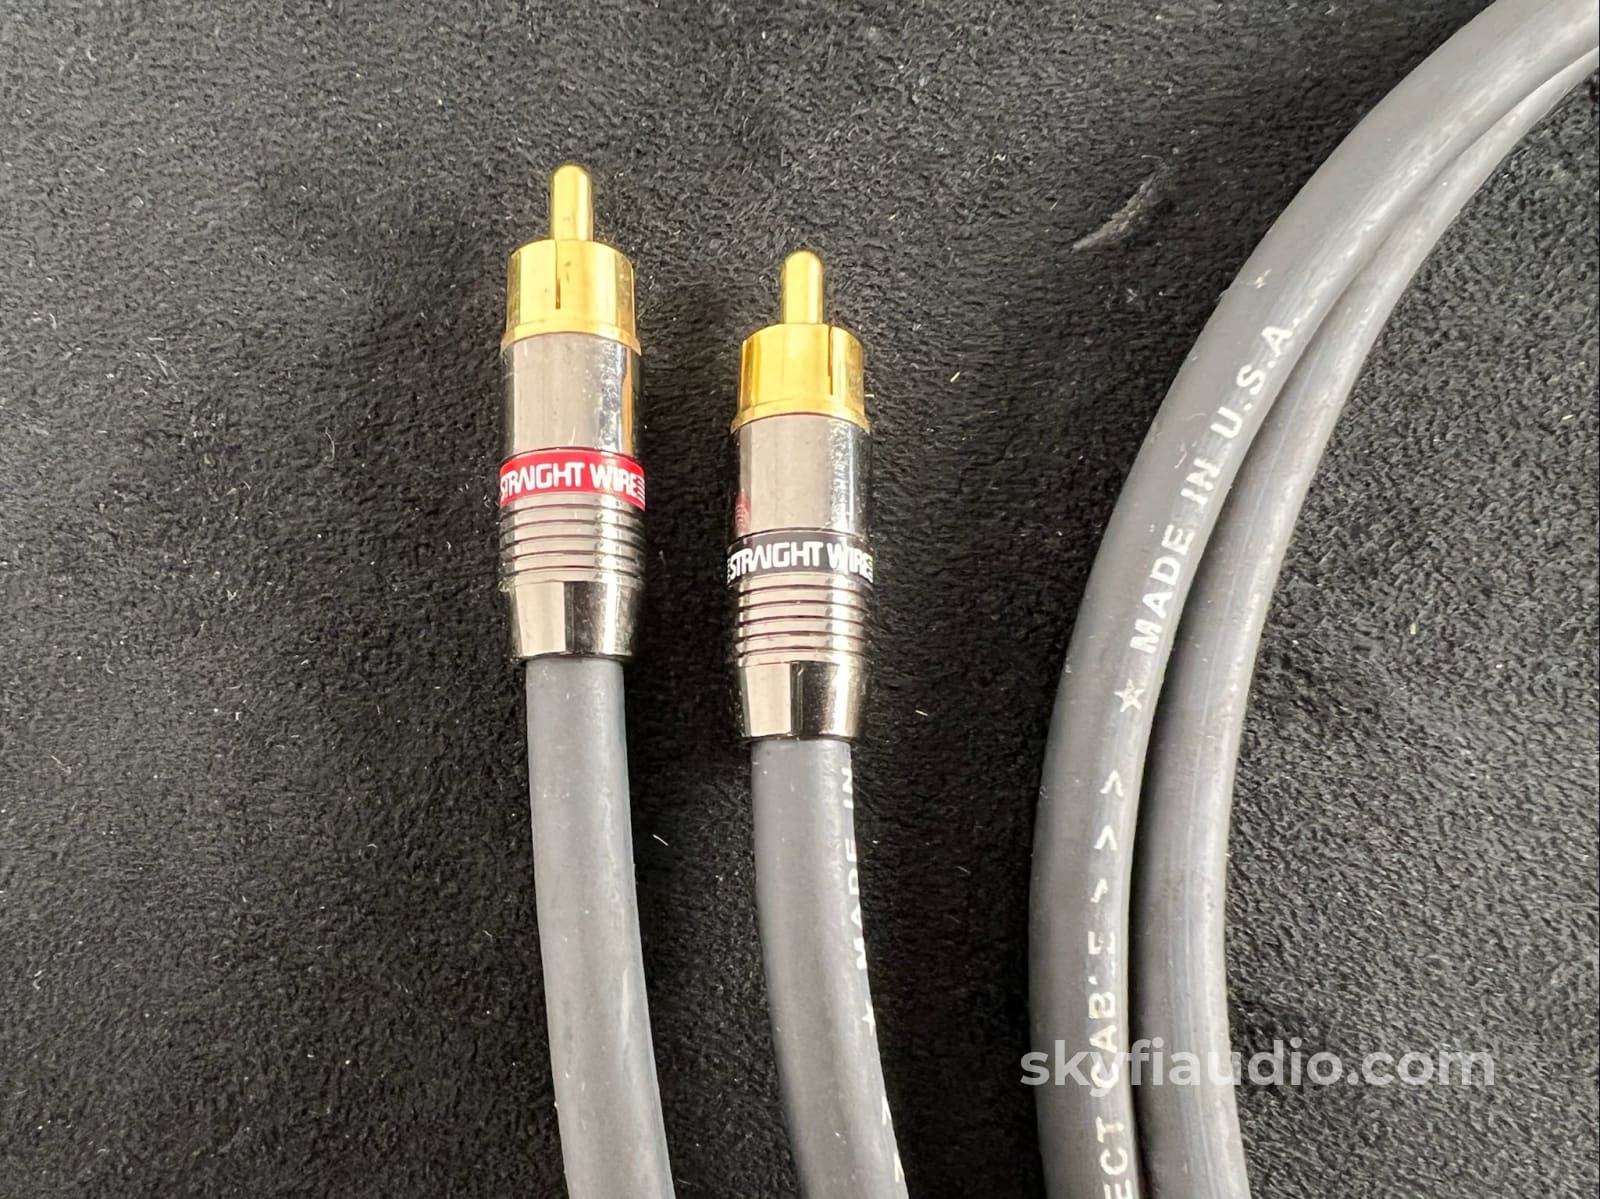 Straight Wire Symphony Rca Interconnects (Pair) - 1M Cables